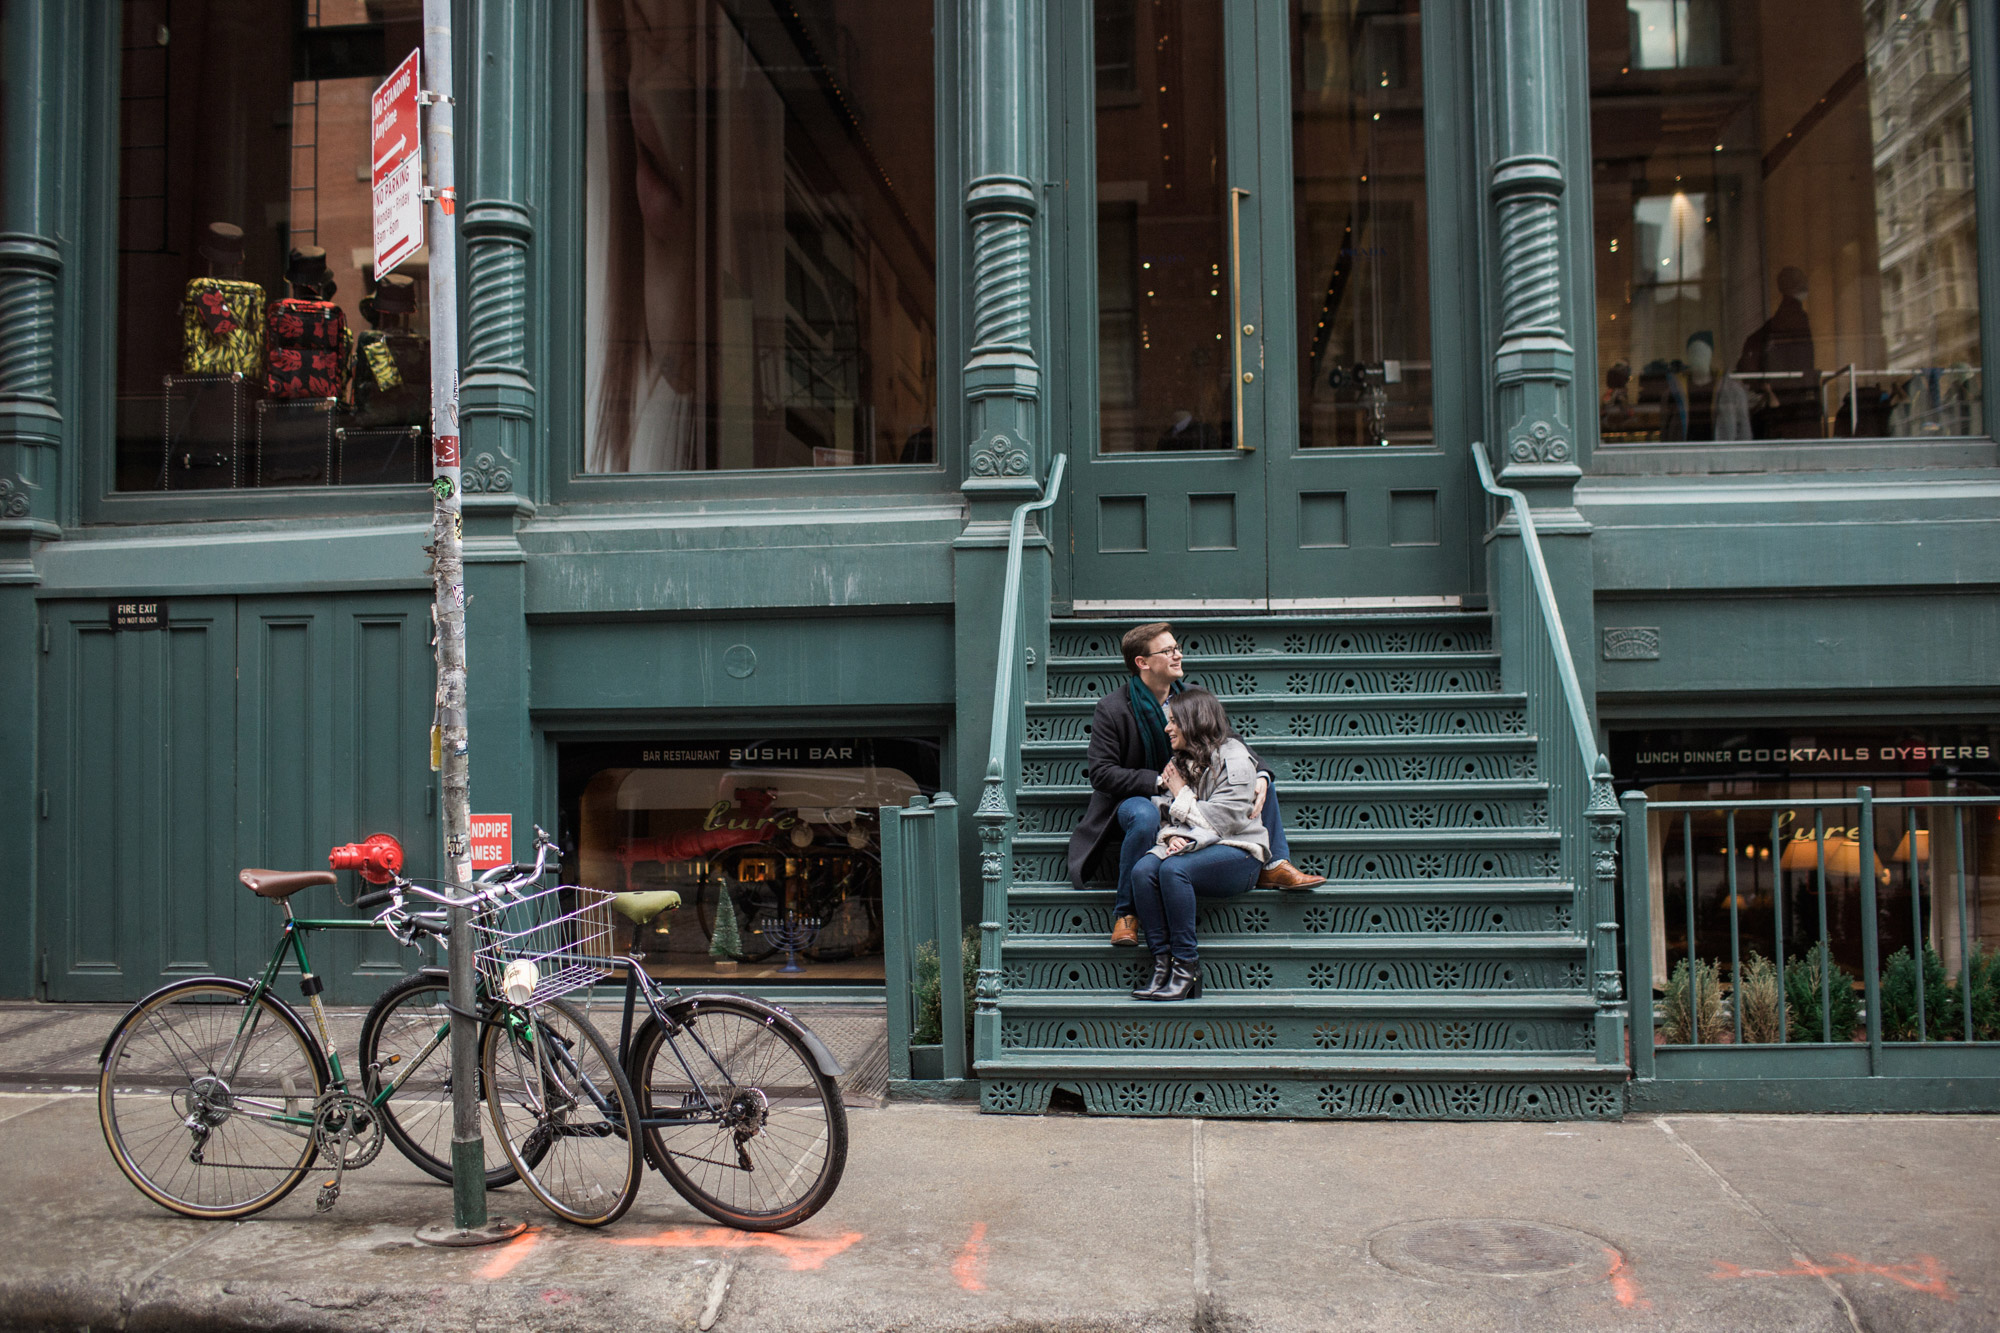 Engagement session in Soho, Manhattan by Kelly Kollar Photography